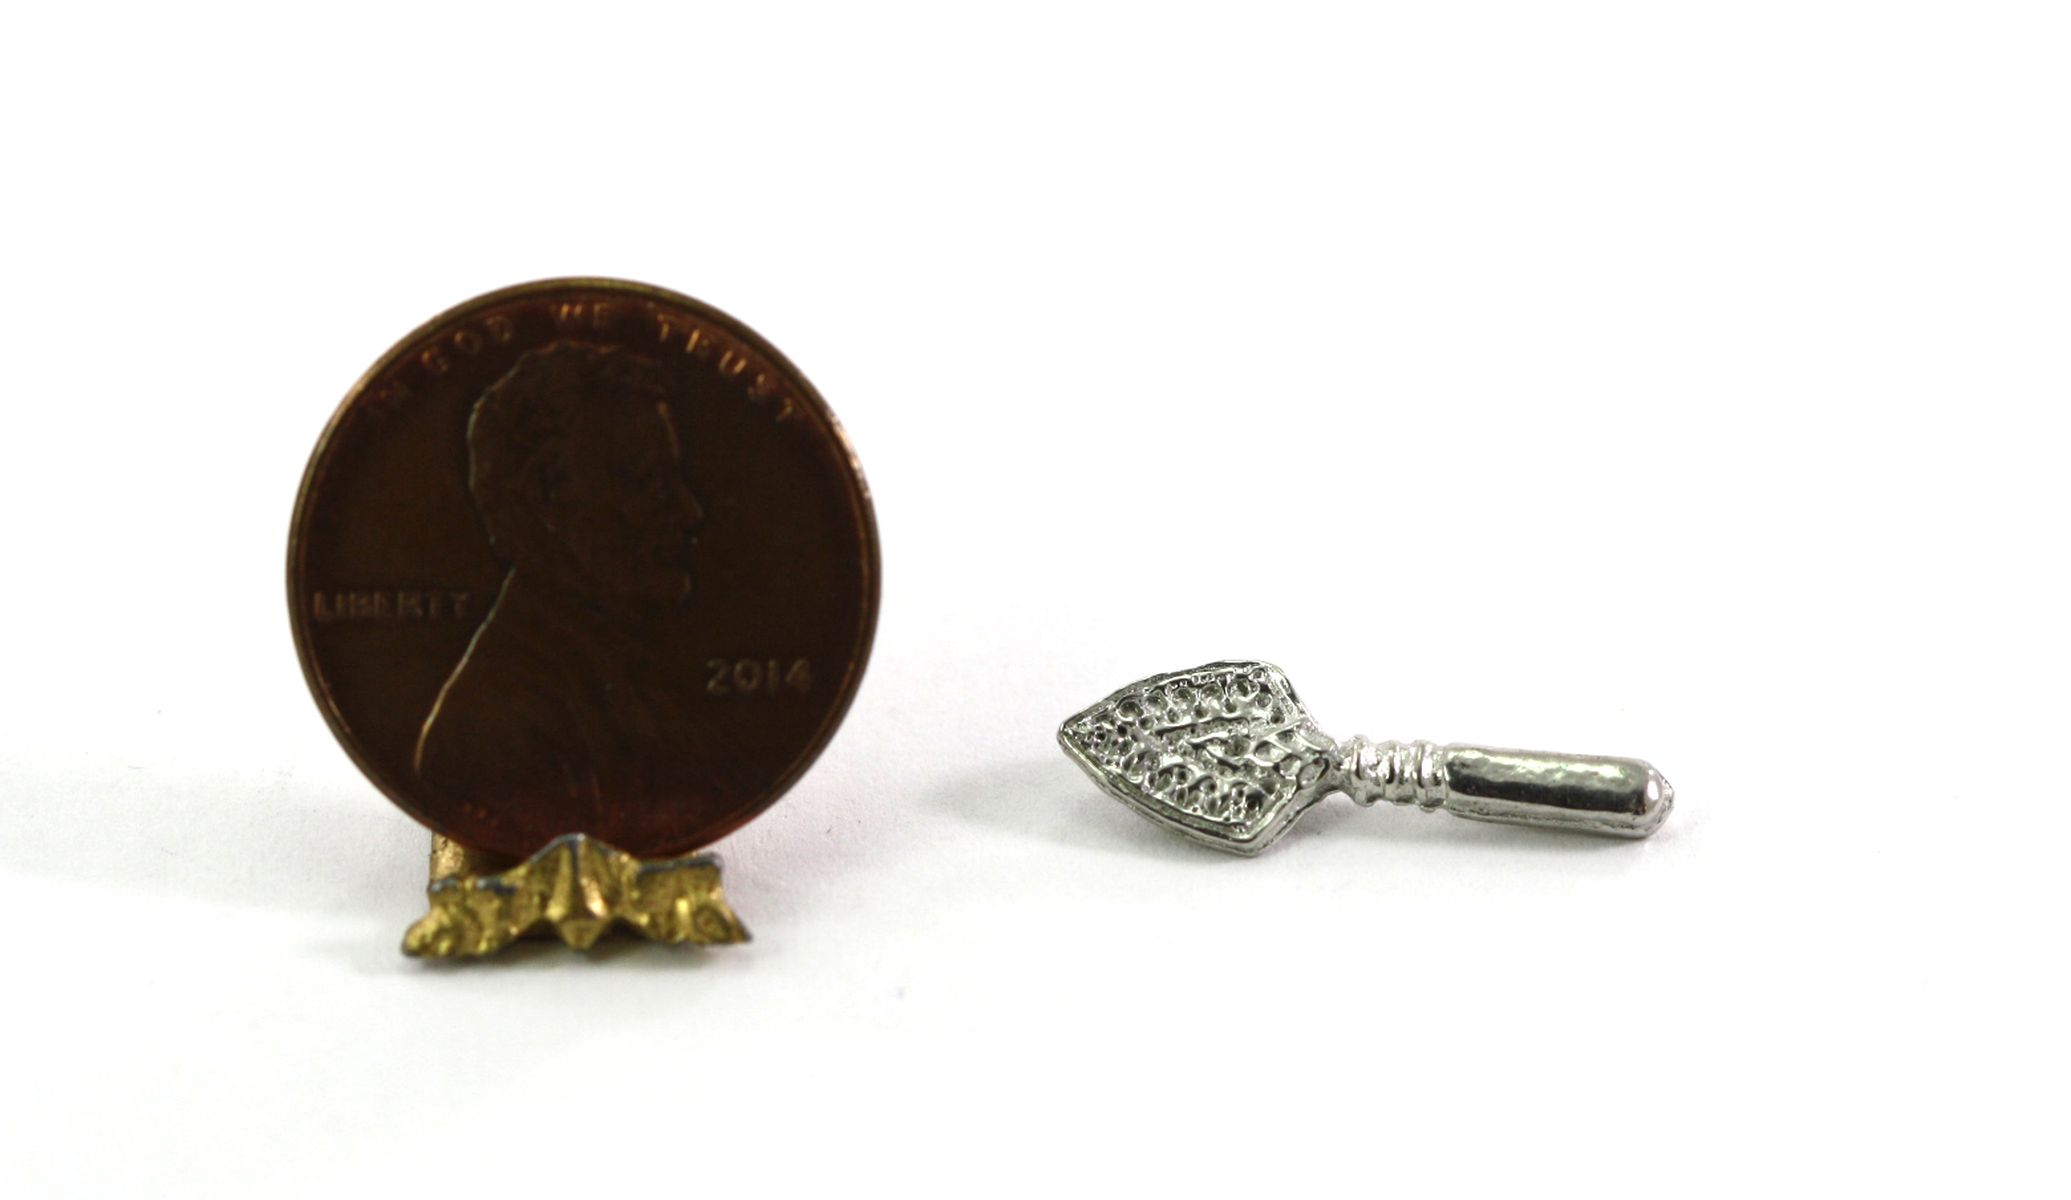 Pastry Slice in Polished Pewter by Warwick Miniatures